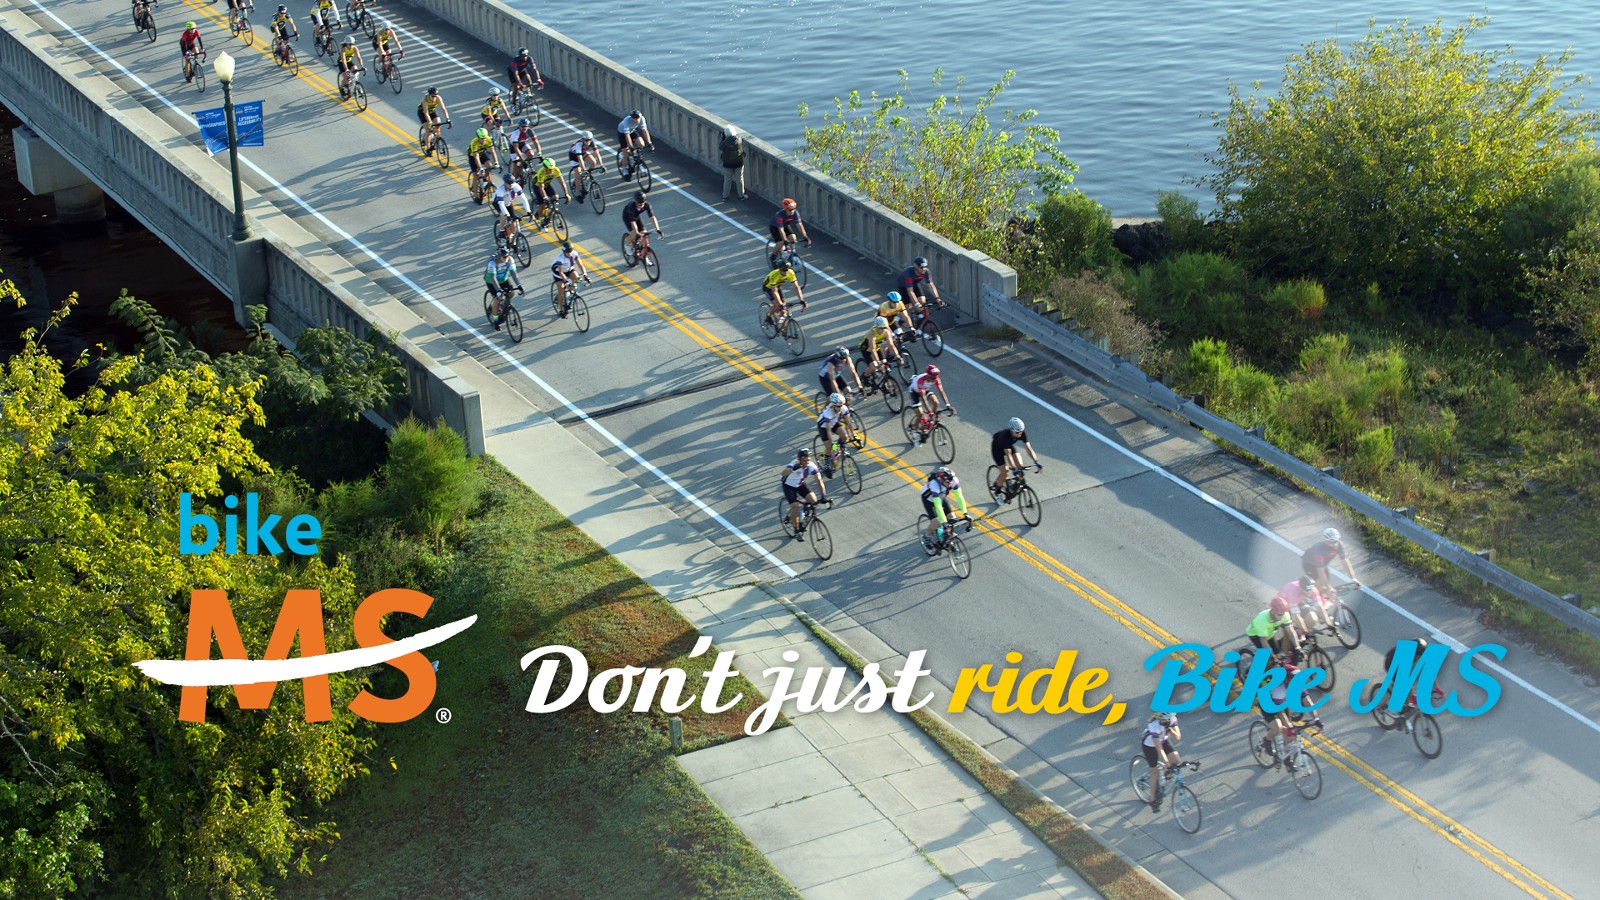 Facebook cover image depicting overhead shot of cyclists on a bridge